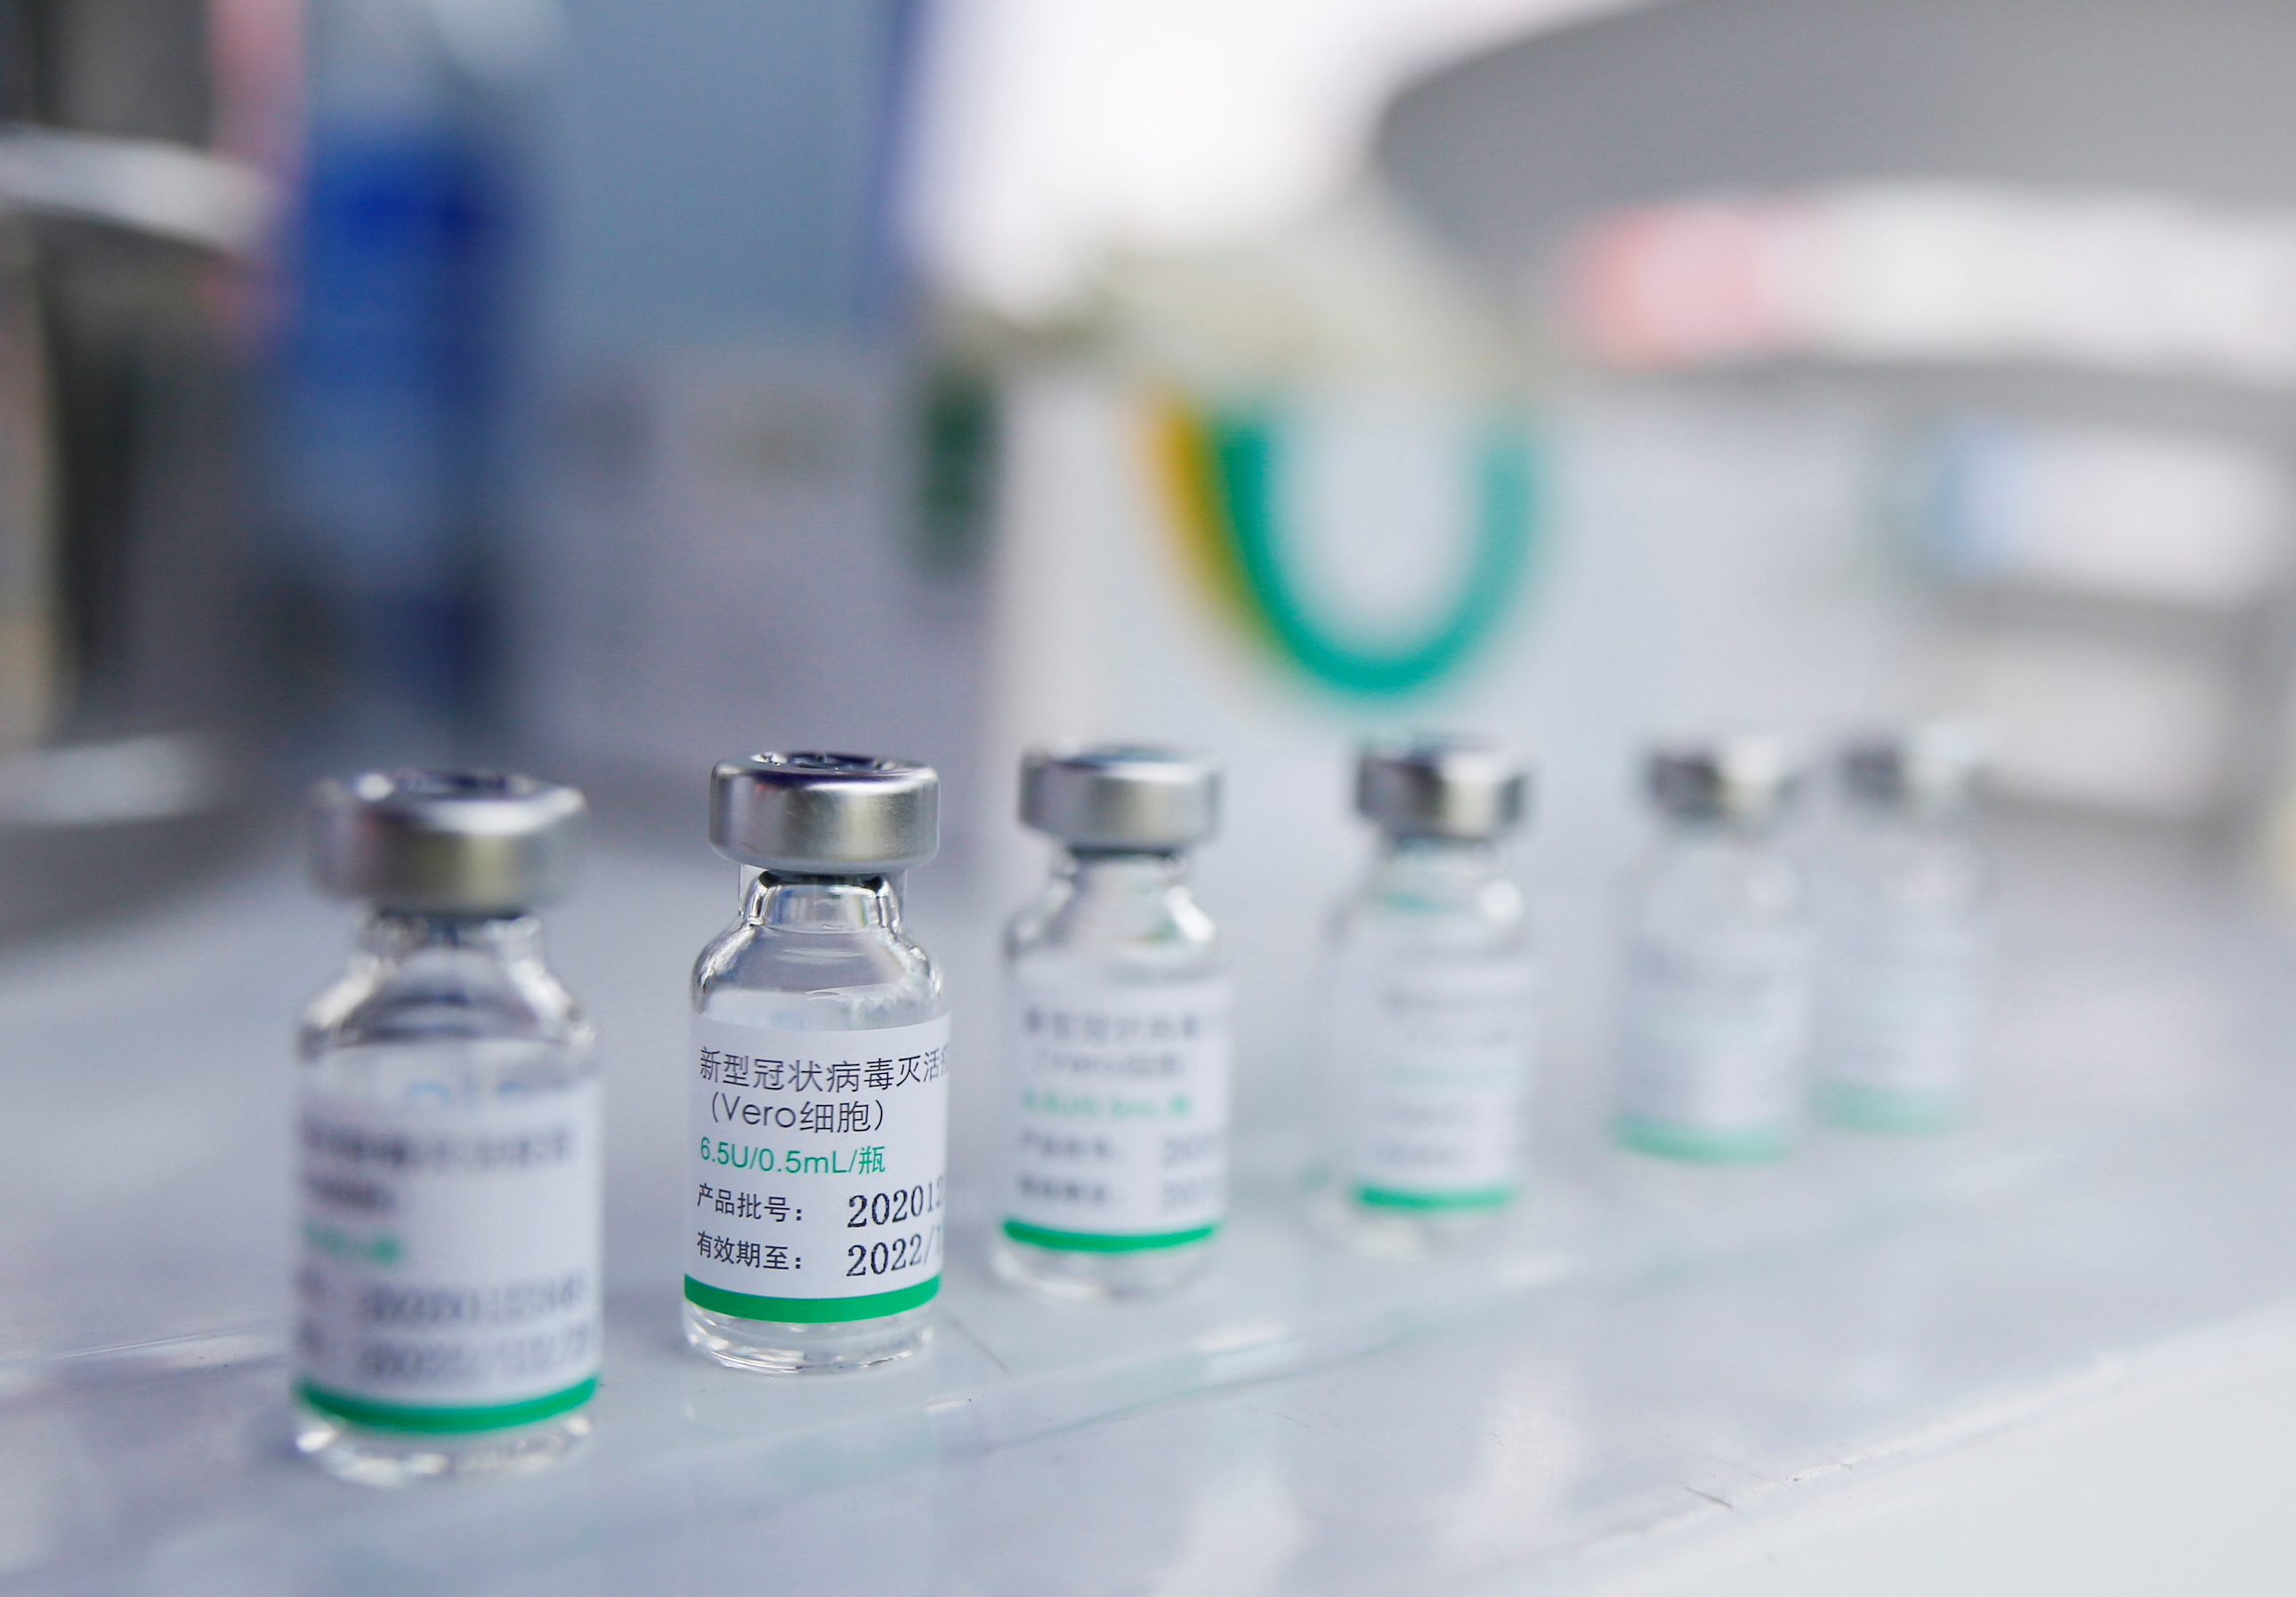 Sinopharm applies for emergency use of its COVID-19 vaccine in the Philippines